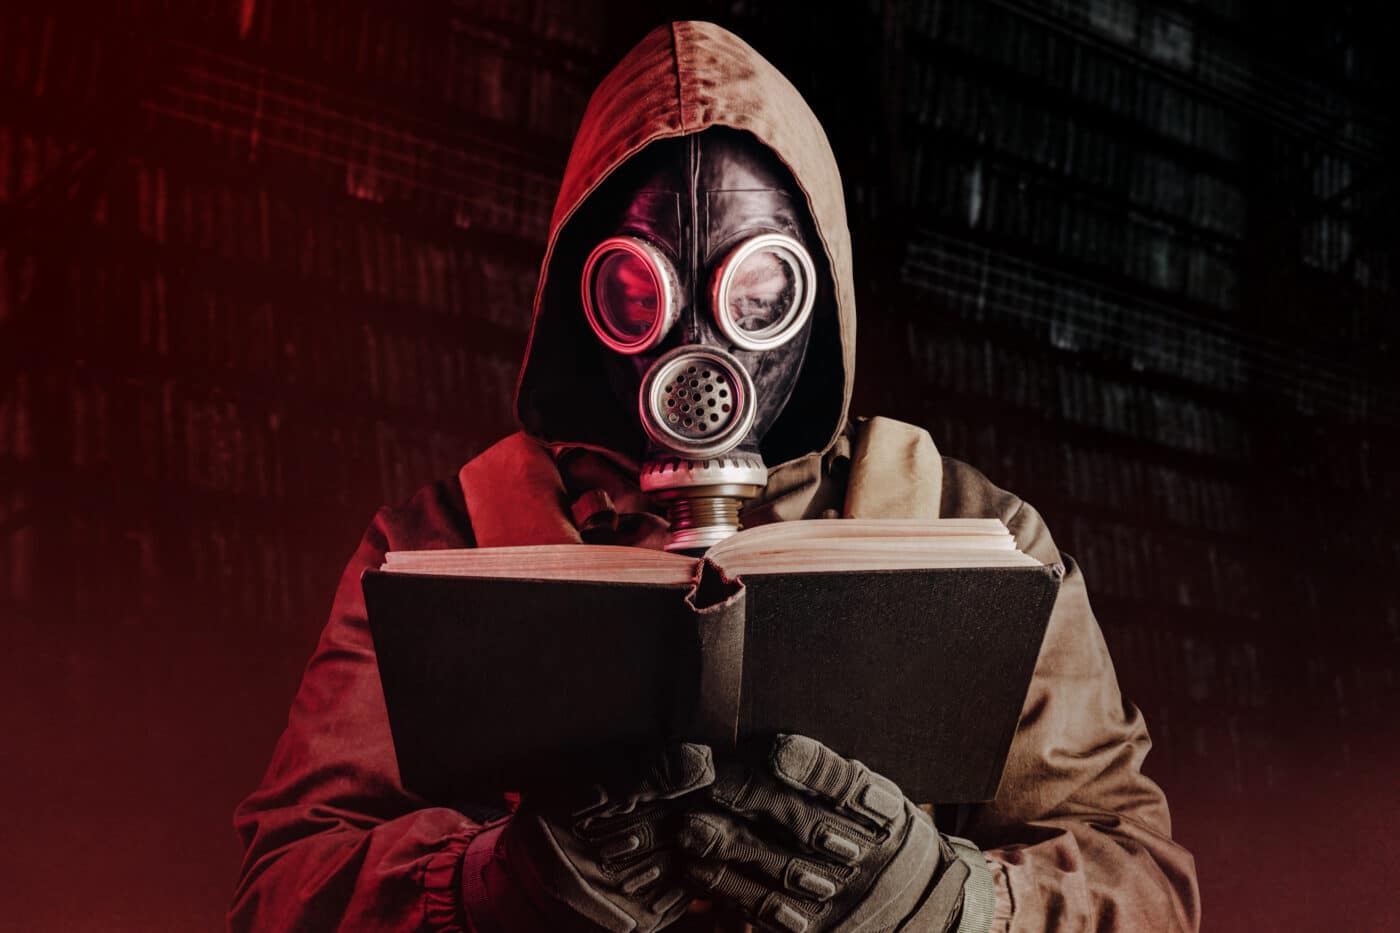 Man in gas mask reading survival book